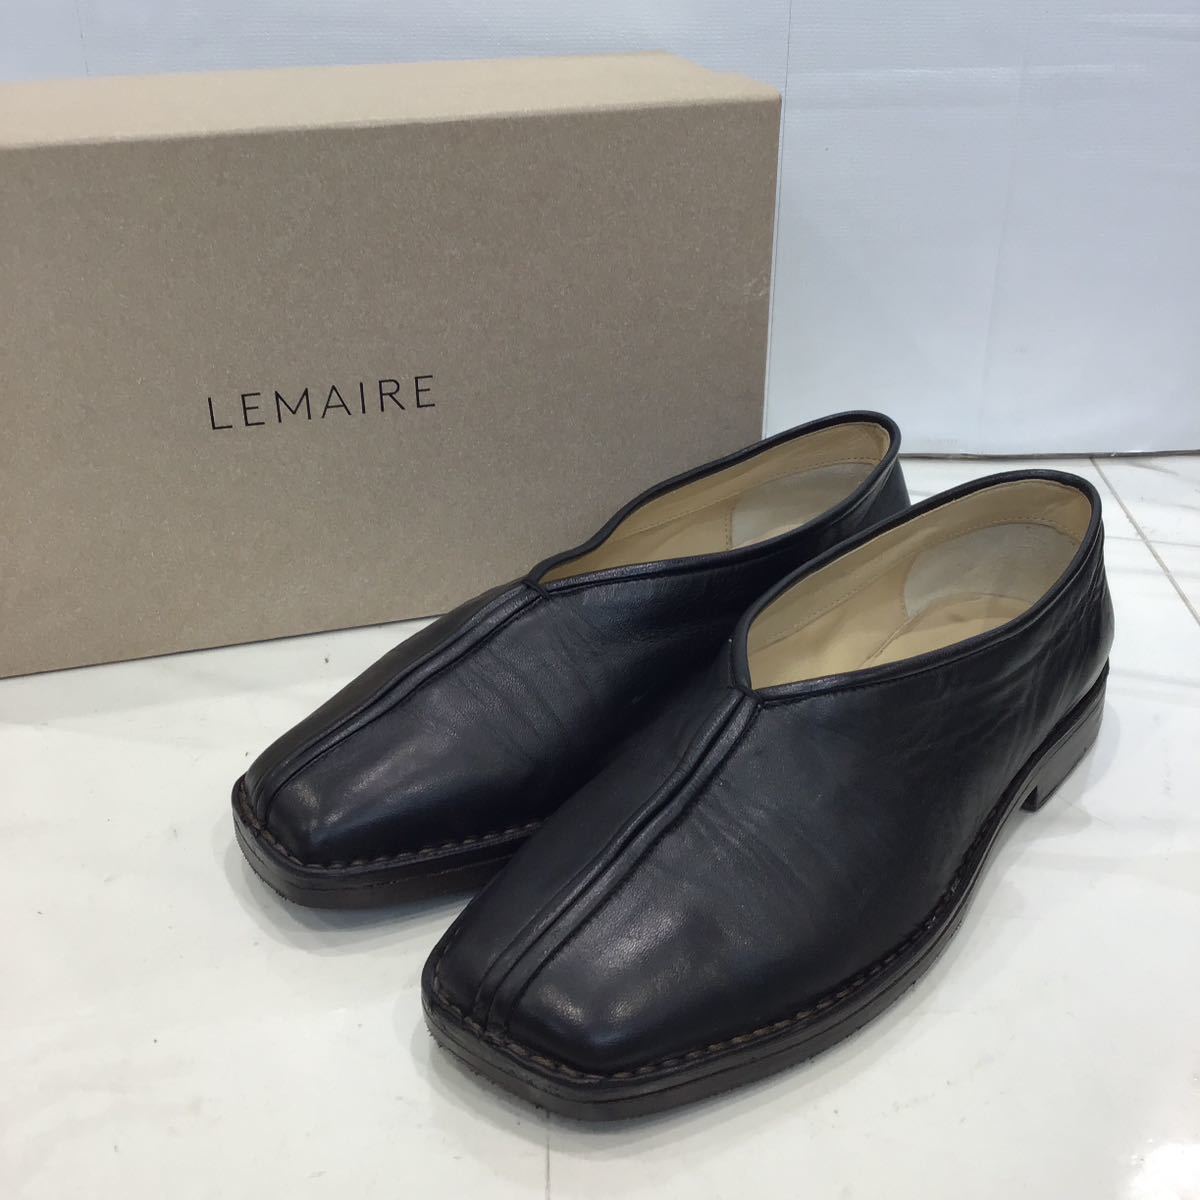 【LEMAIRE ルメール】FO0007 FLAT PIPED SLIPPERS フラットシューズ 41 ブラック レザー 2309oki